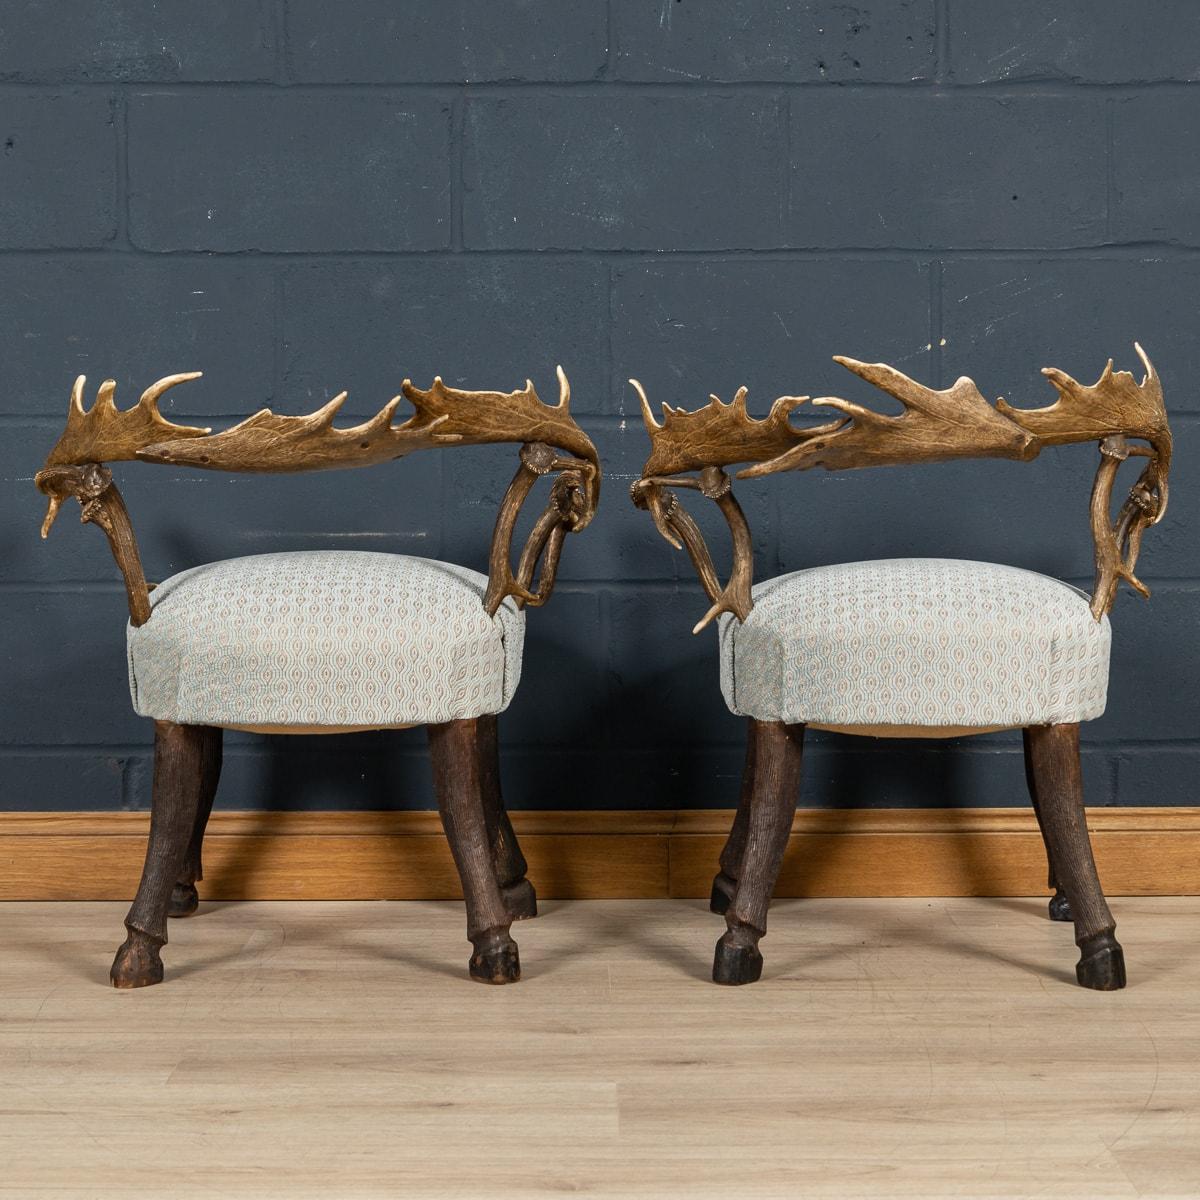 Fabric 19th Century Pair Of Black Forest Antler Horn Hall Chairs, Swiss/German, c.1890